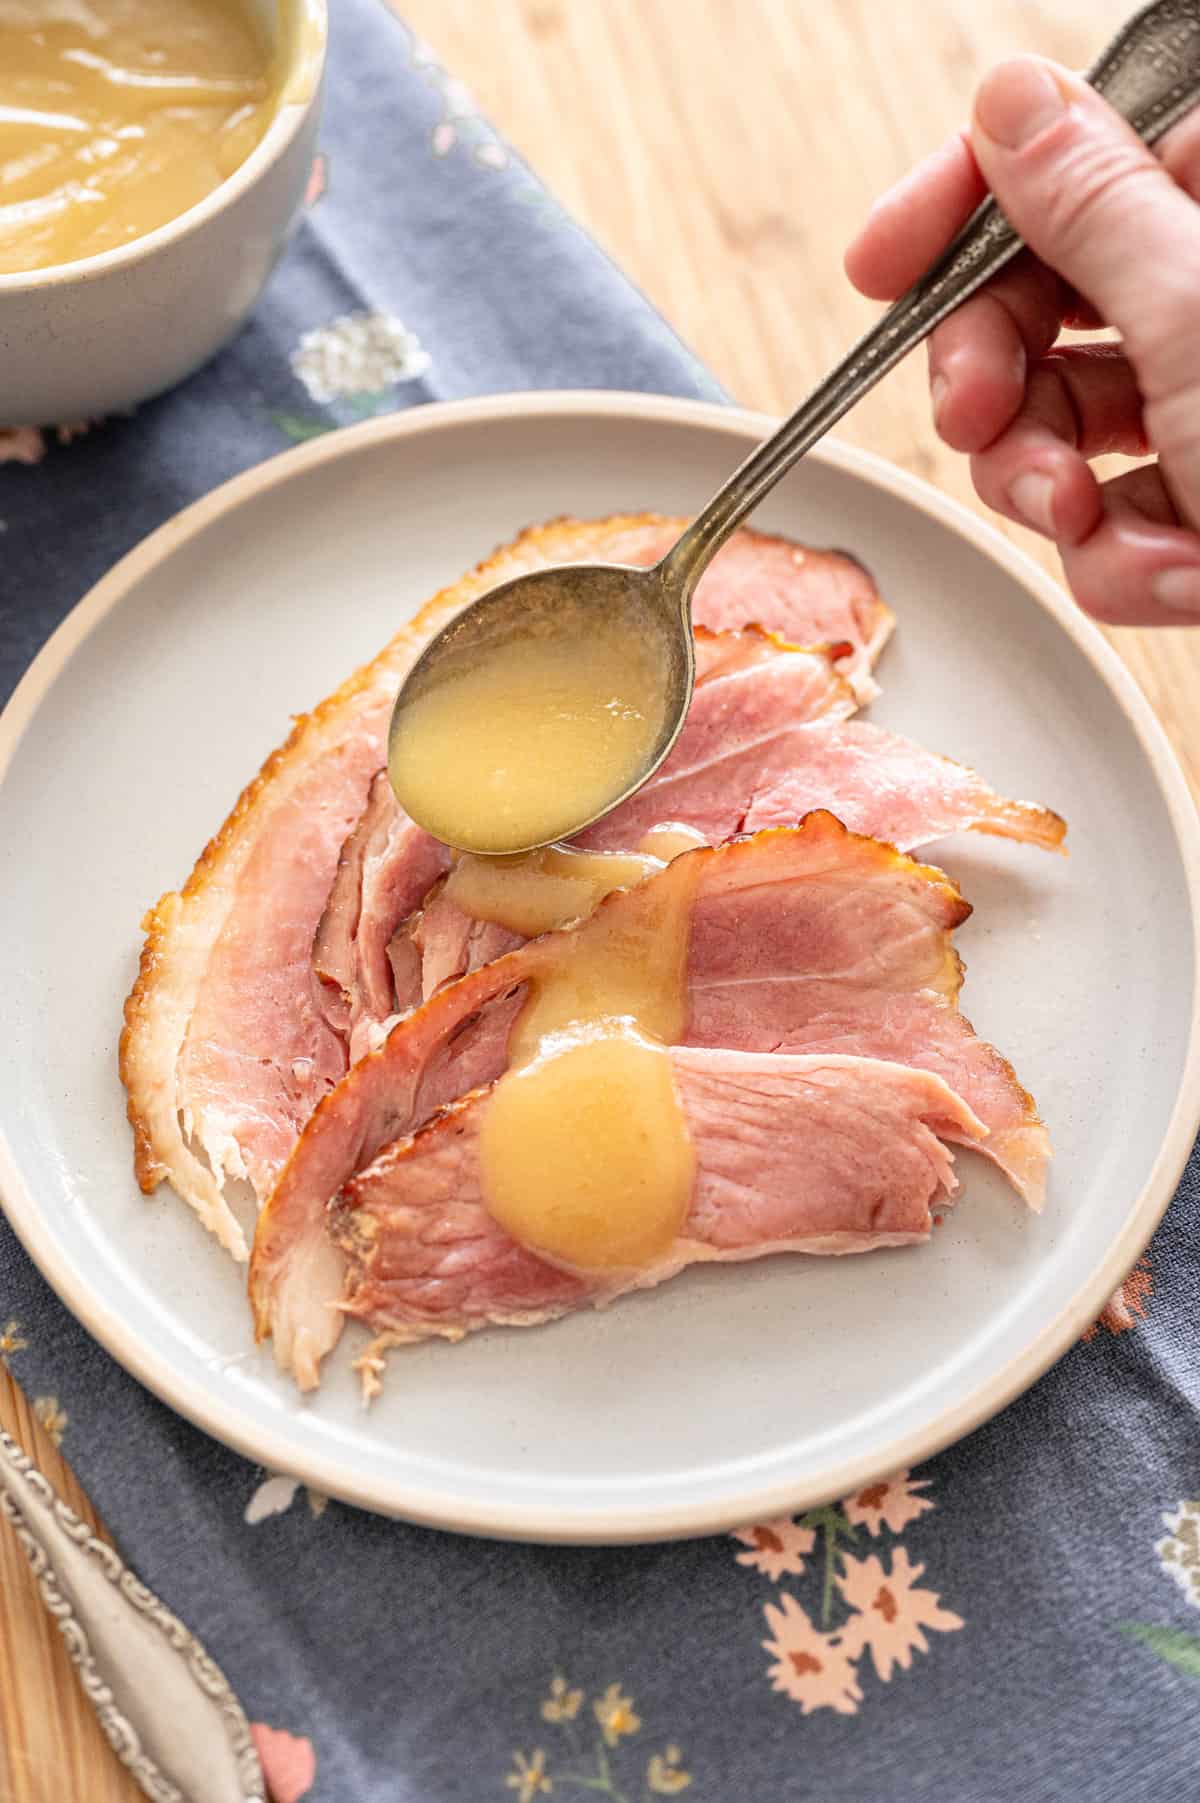 Spiral sliced ham slices on a place with pineapple sauce being drizzled over it.